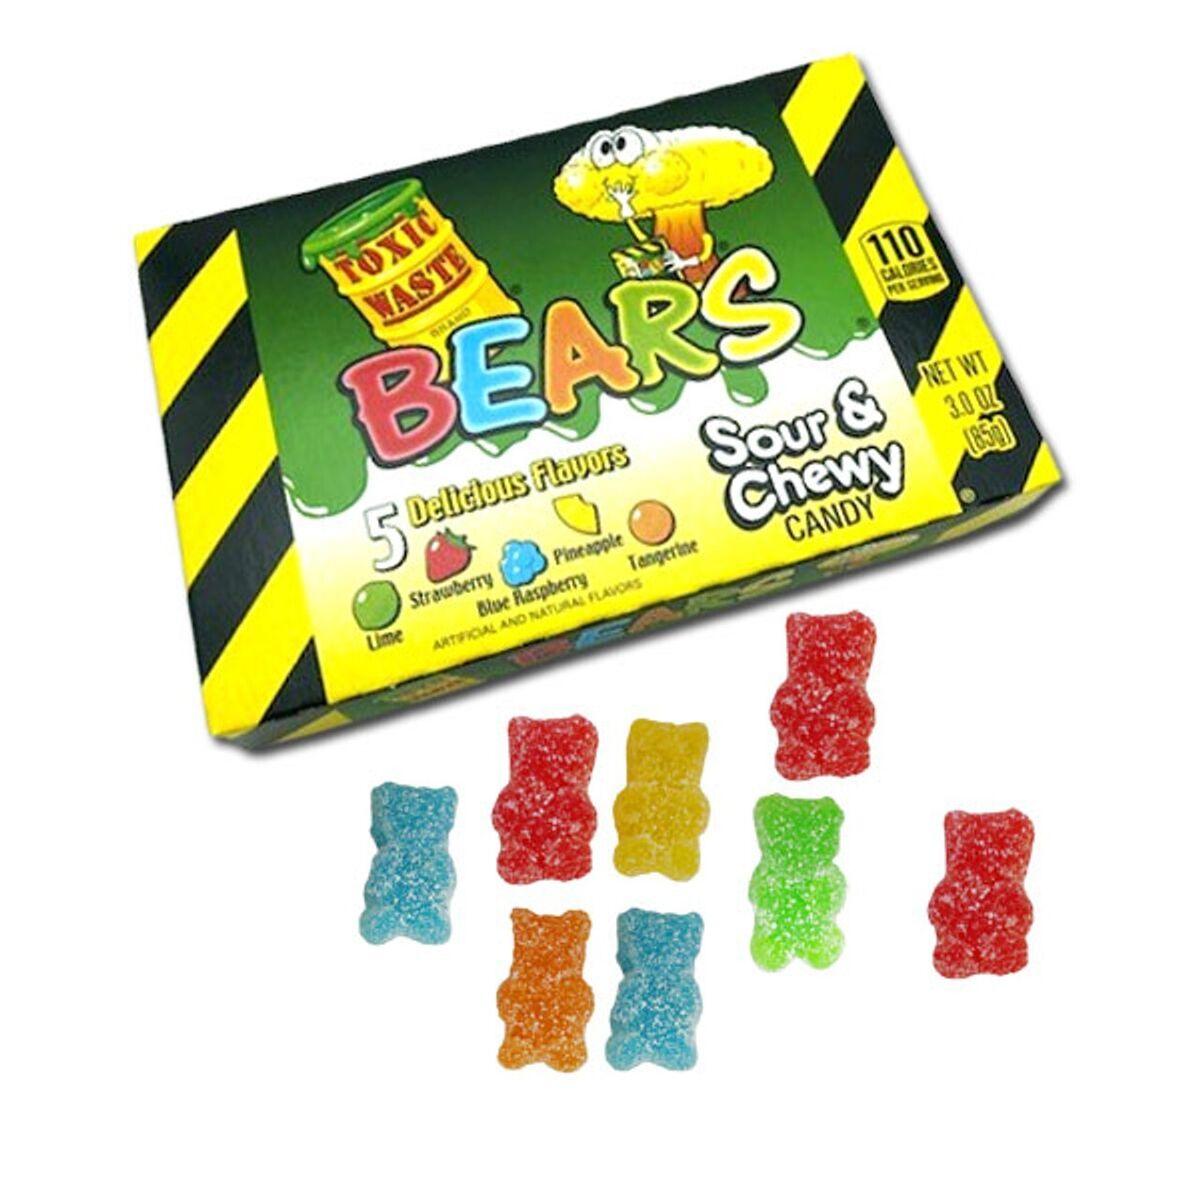 Toxic Waste Bears Sour & Chewy Candy Theatre Box 3OZ - Extreme Snacks